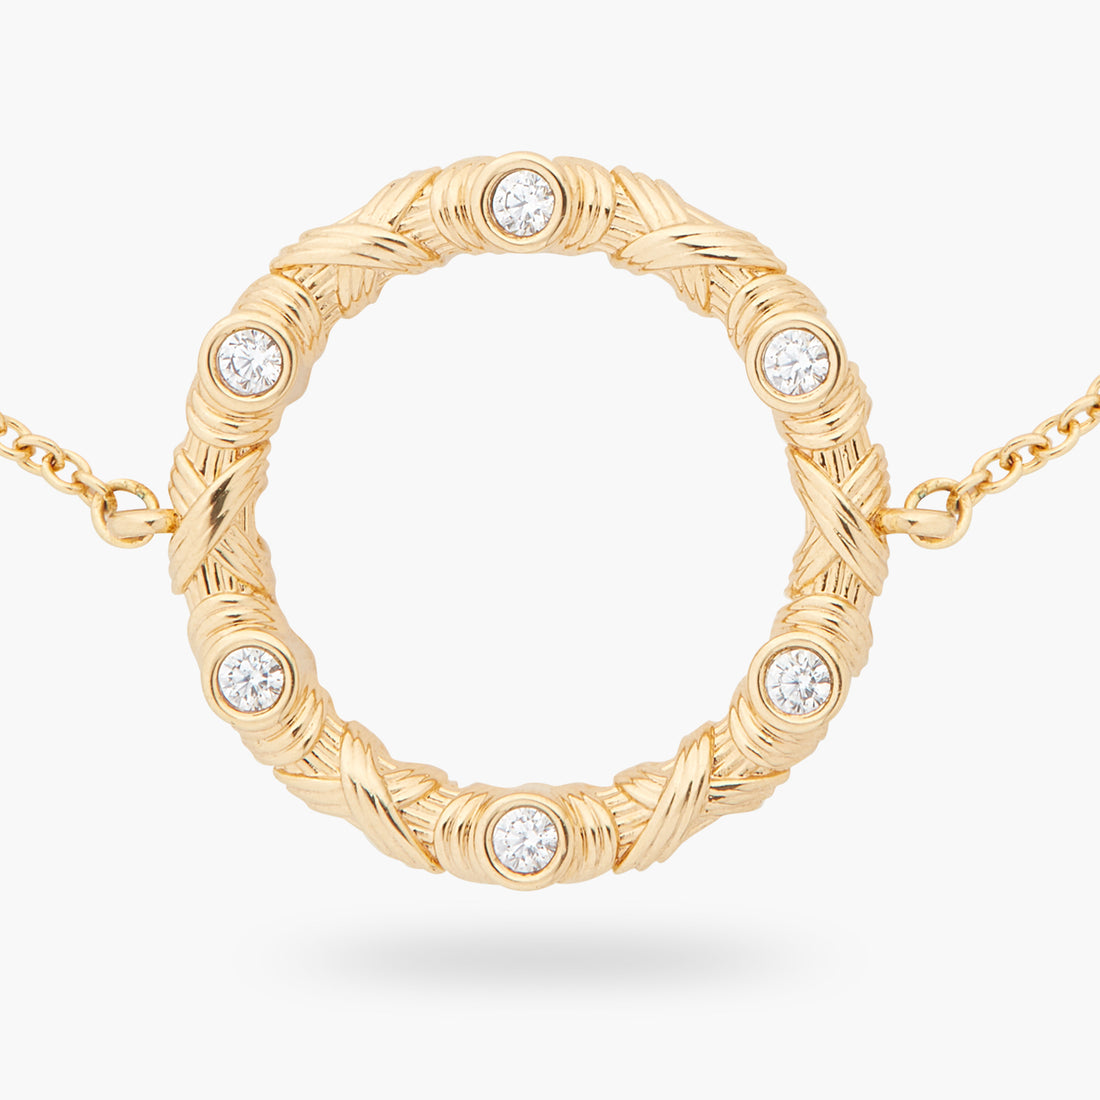 Les Néréides Woven Basketry Circle and Crystal Thin Bracelet